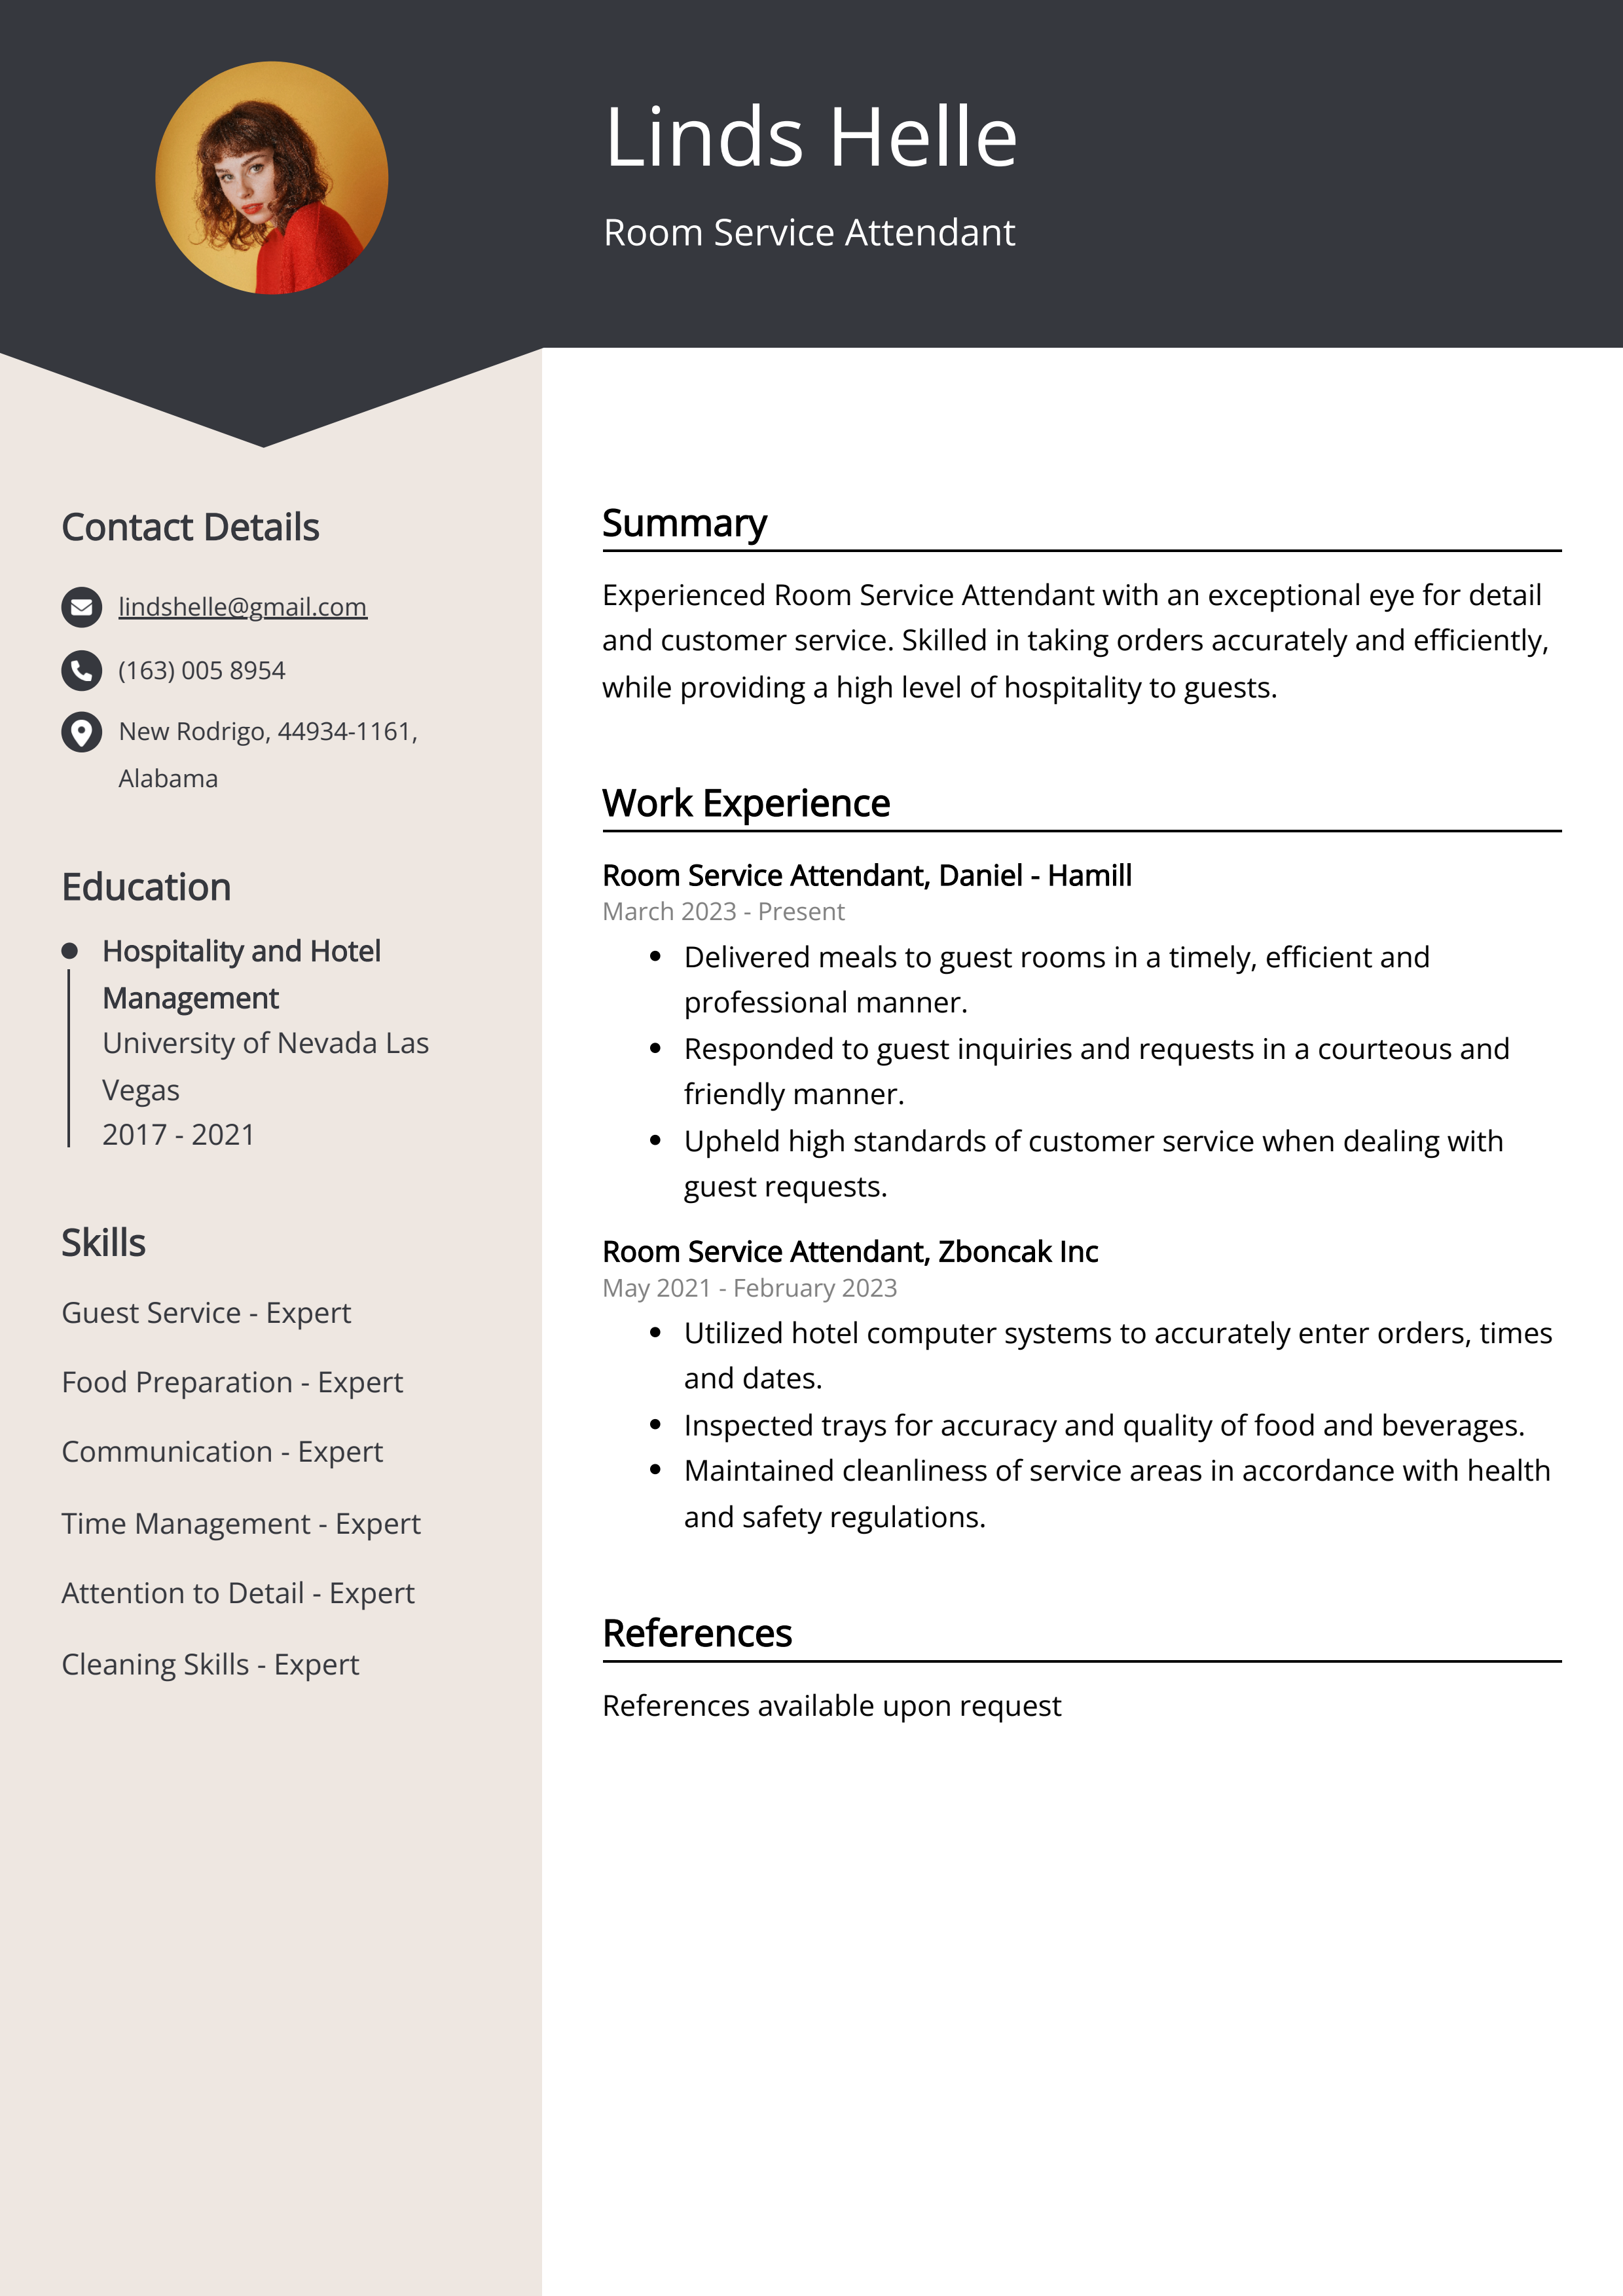 Room Service Attendant Resume Example